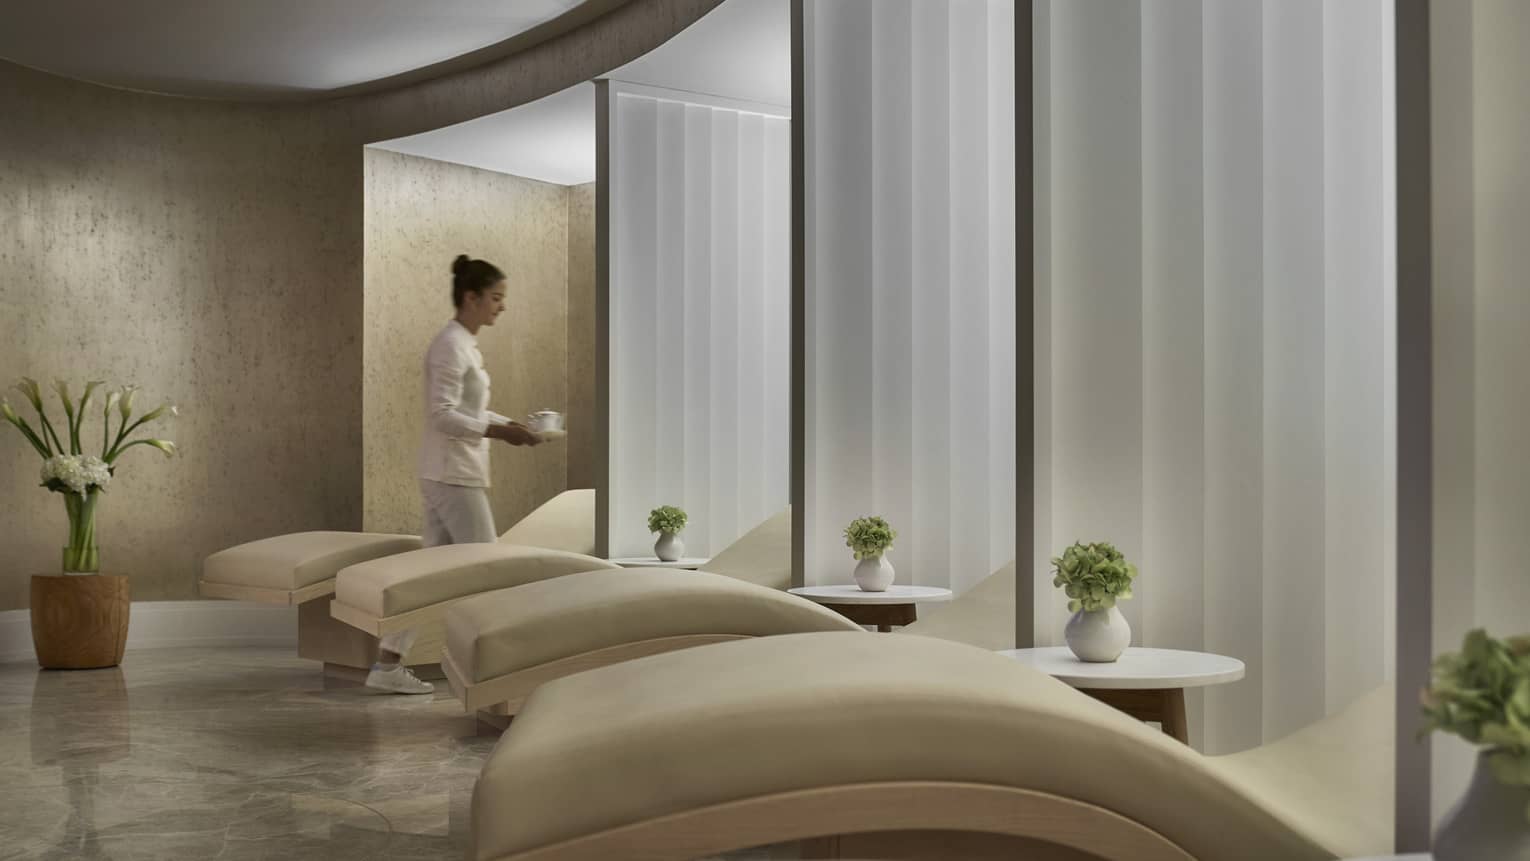 A woman caries cup of coffee in spa relaxation room with five lounge chairs